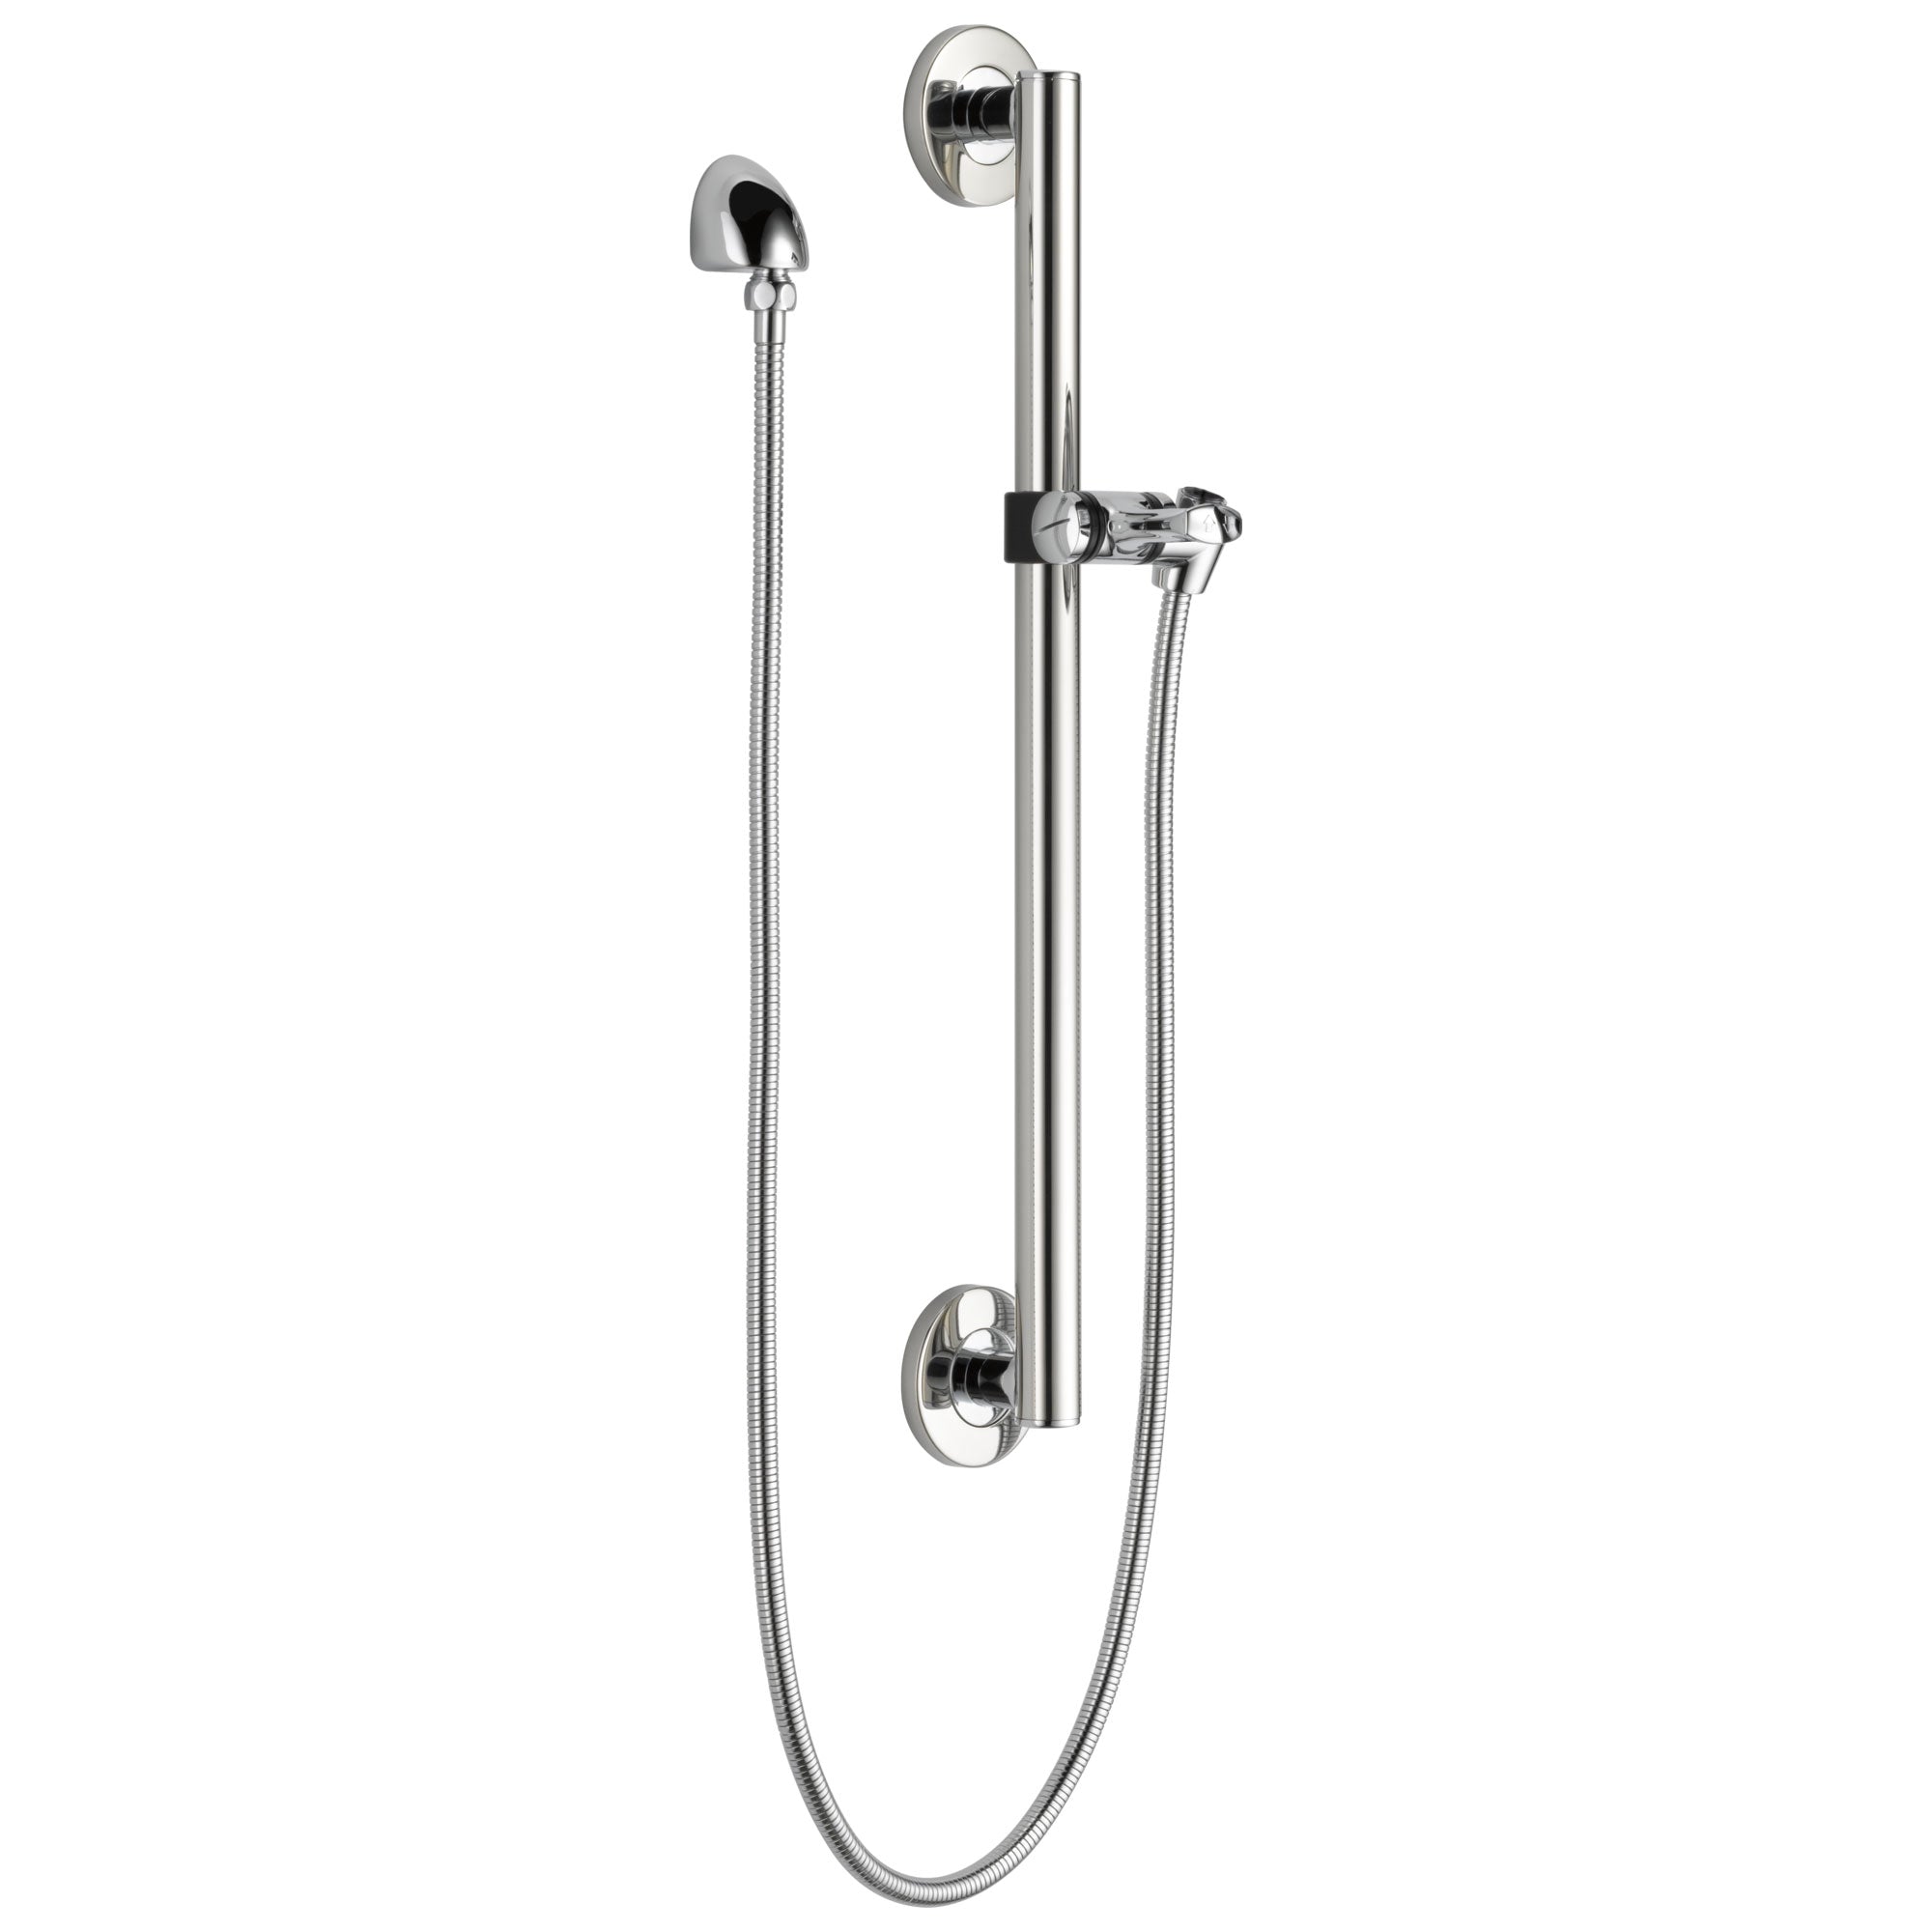 Delta Chrome Finish Modern Slide Bar / Grab Bar Assembly with Adjustable Mounting Bracket, Wall Elbow, and Hose (Requires Hand Spray) D51600